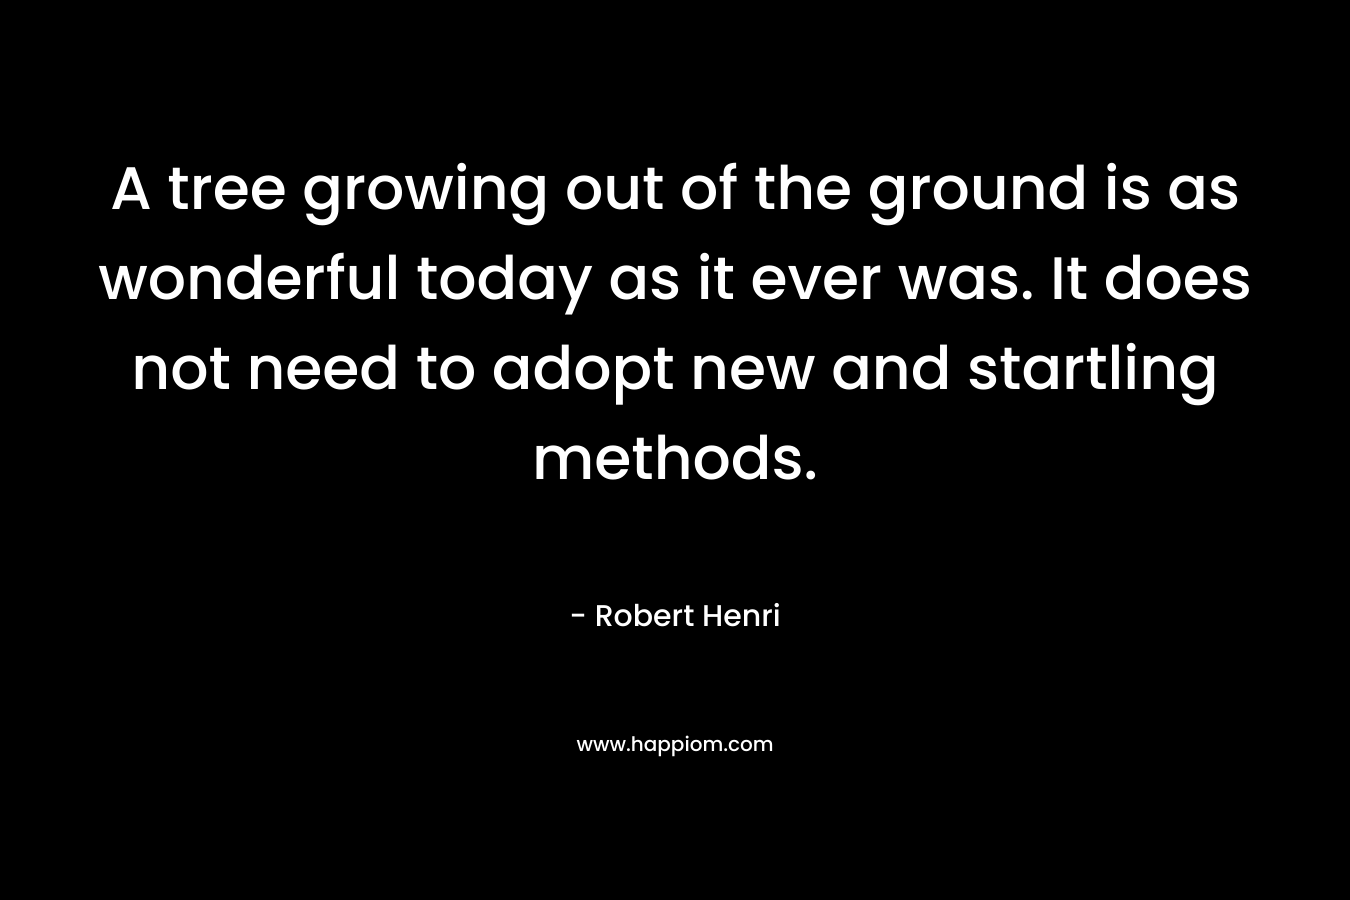 A tree growing out of the ground is as wonderful today as it ever was. It does not need to adopt new and startling methods. – Robert Henri